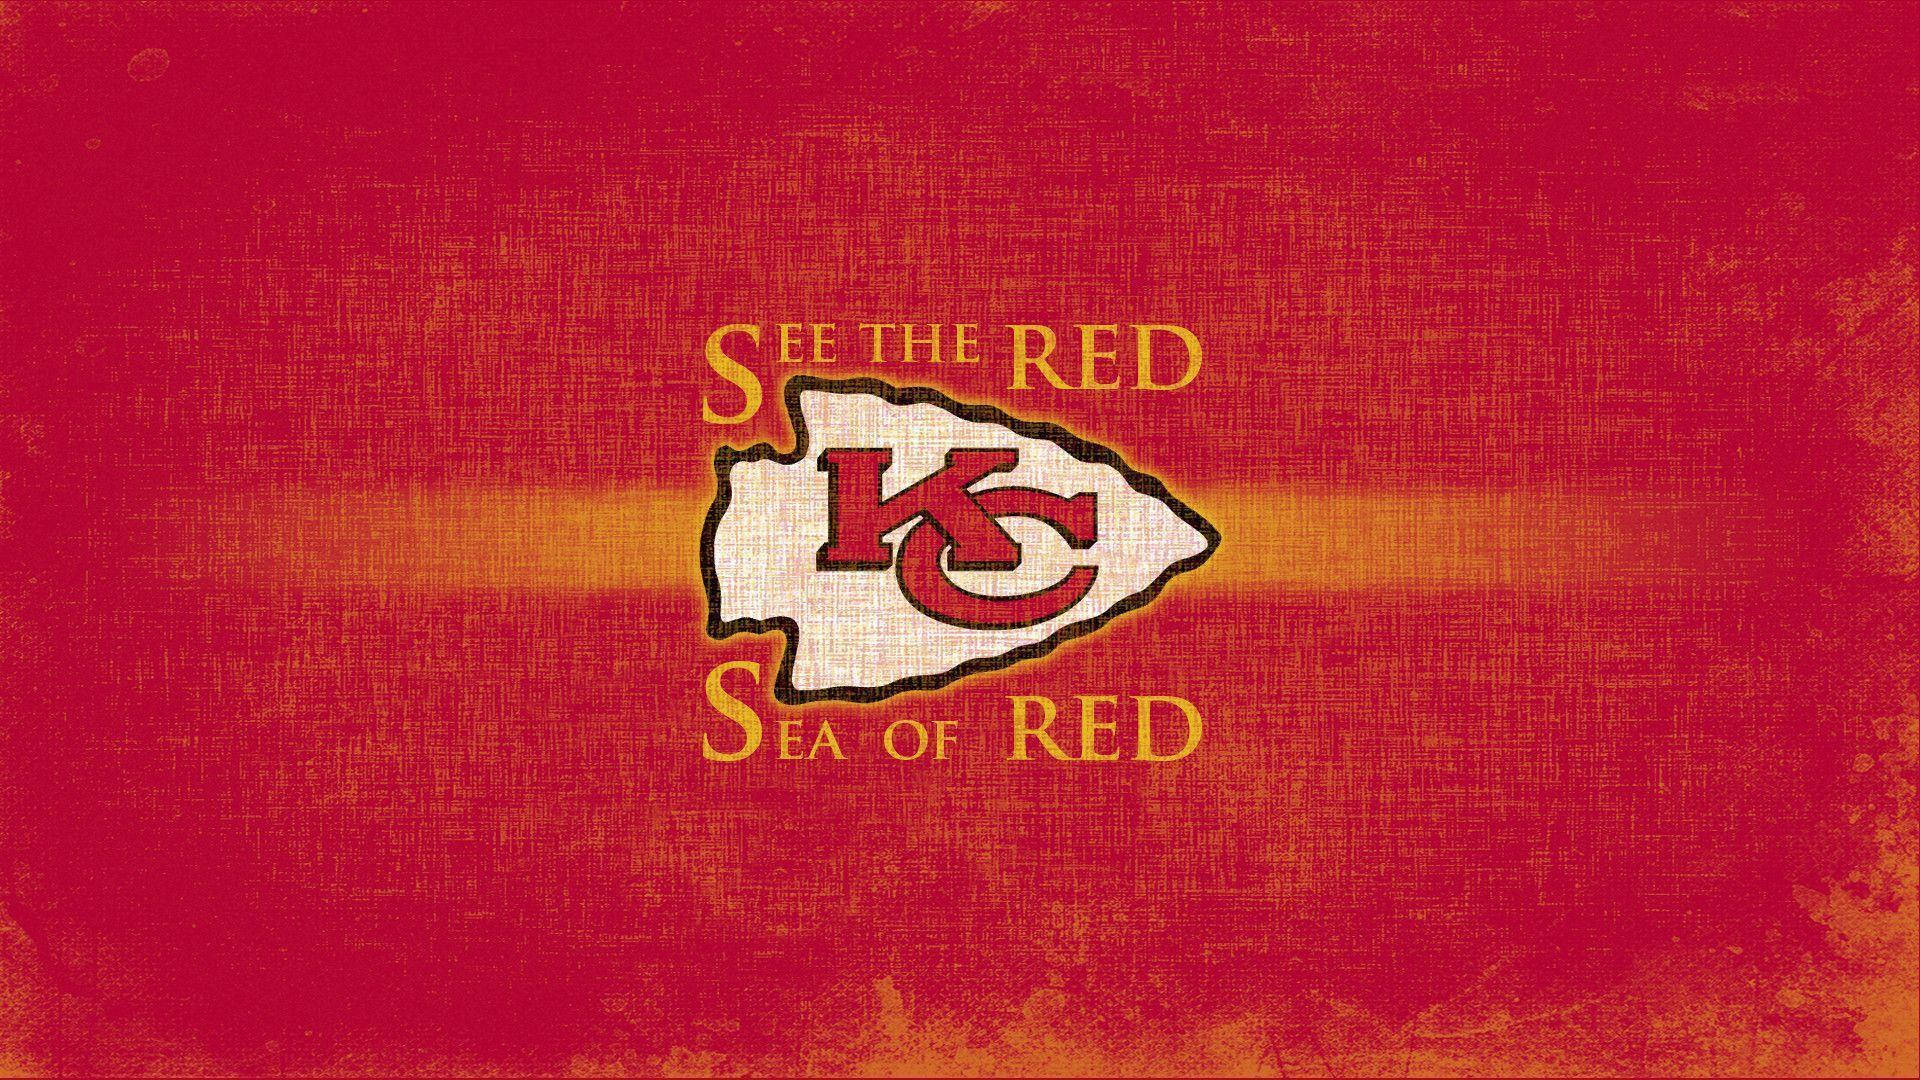 Representing the City and Fans with Pride: The Kansas City Chiefs Wallpaper